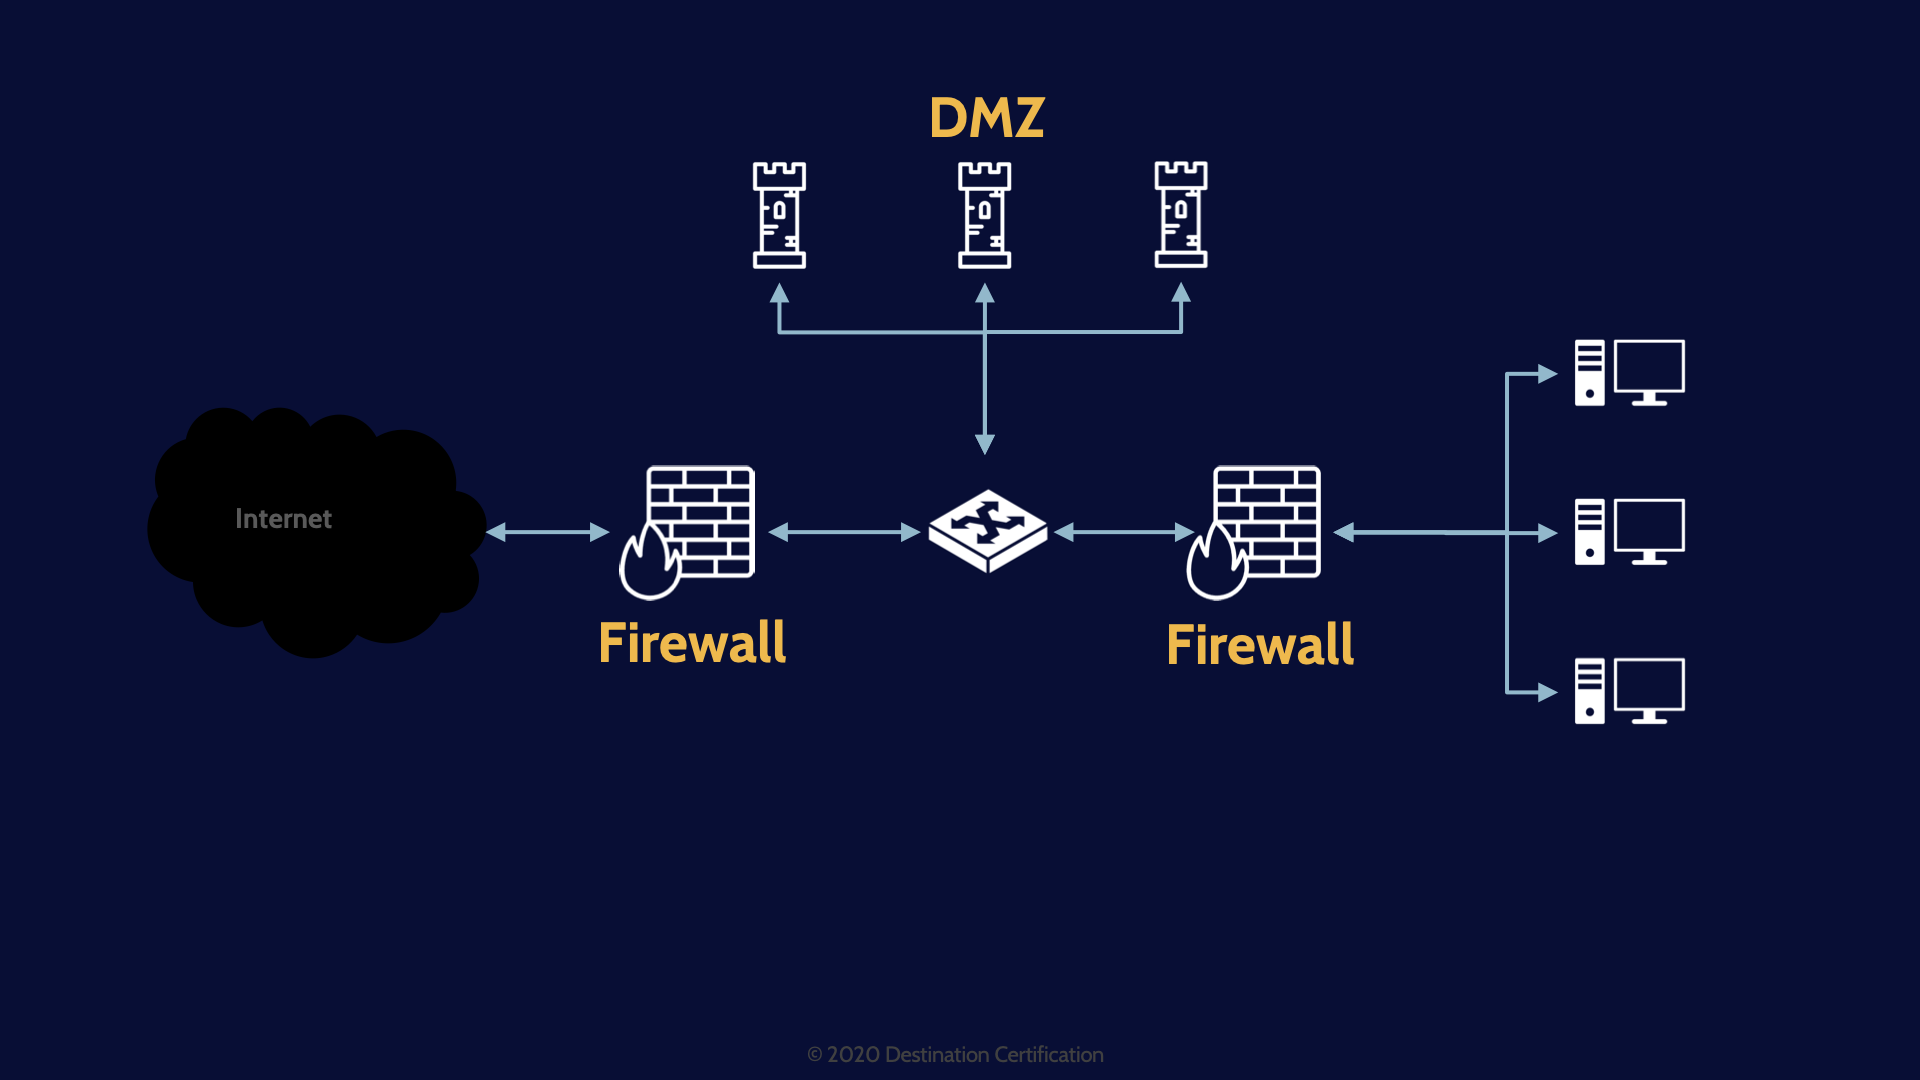 Image of adding secondary firewall for protection on mindmap cissp domain 4 - Destination Certification